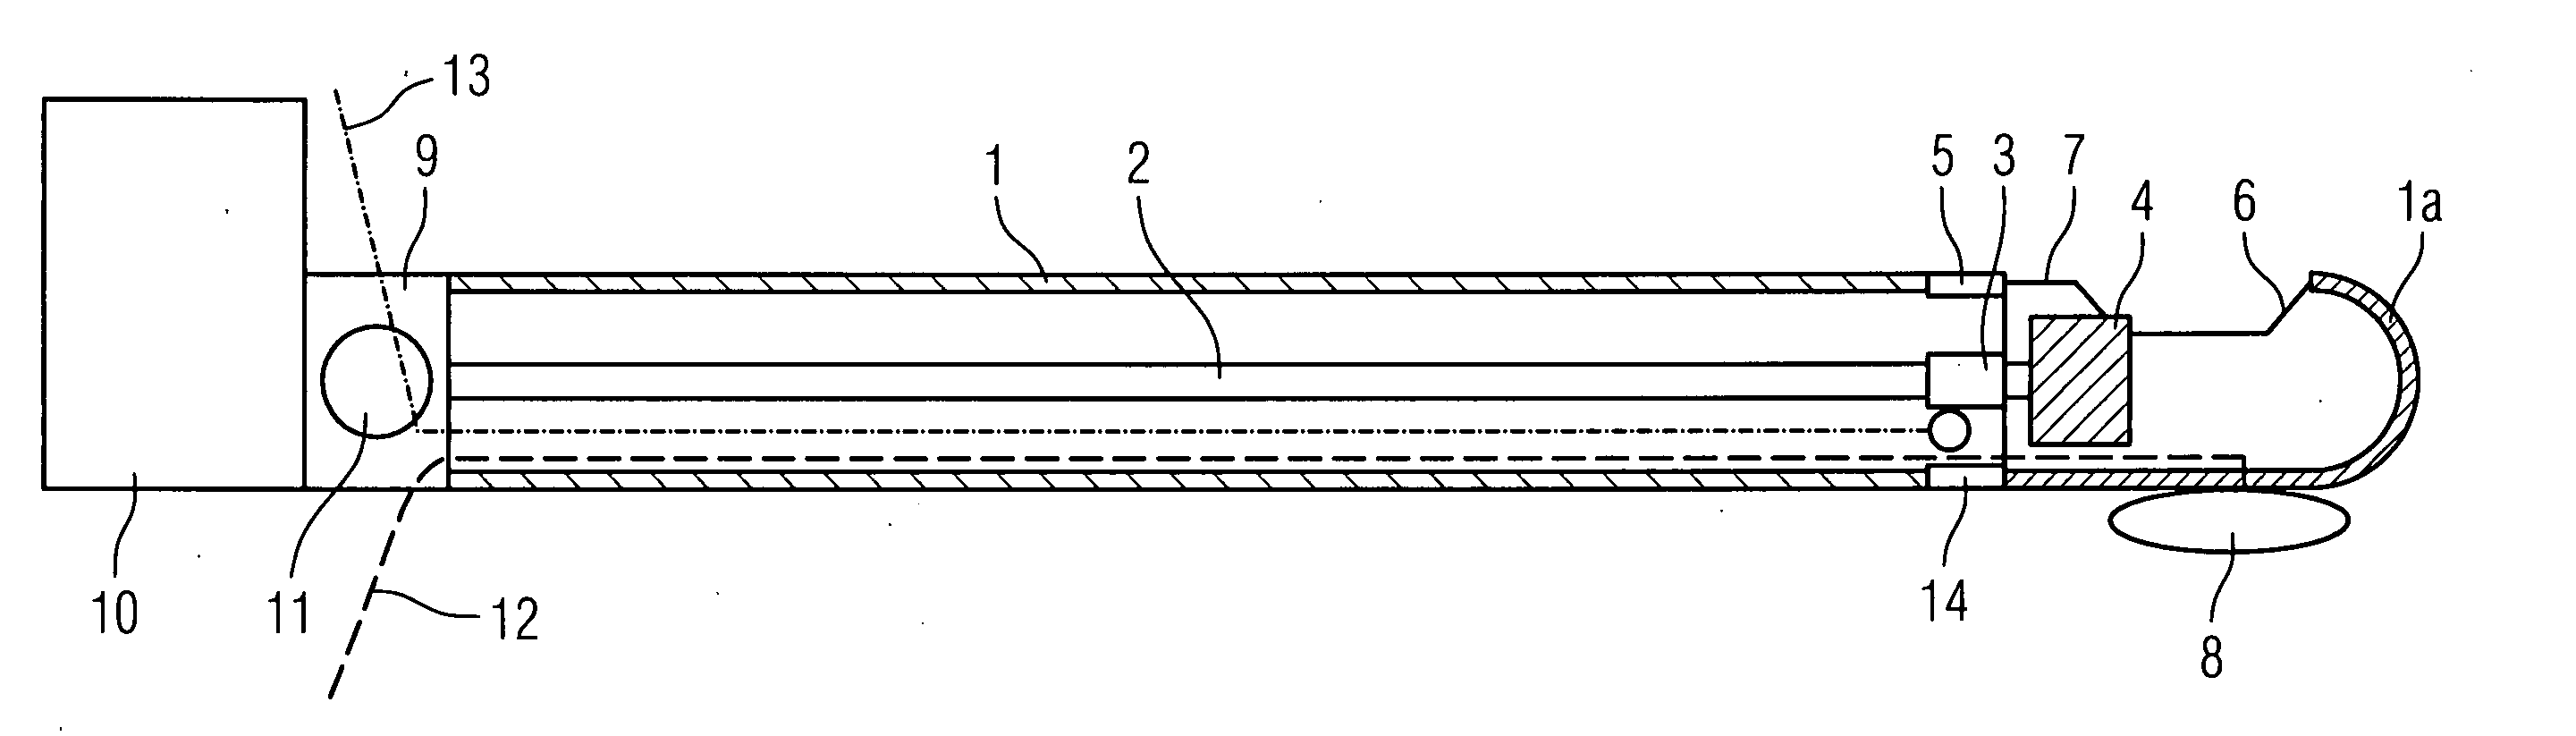 Device for applying and monitoring medical atherectomy